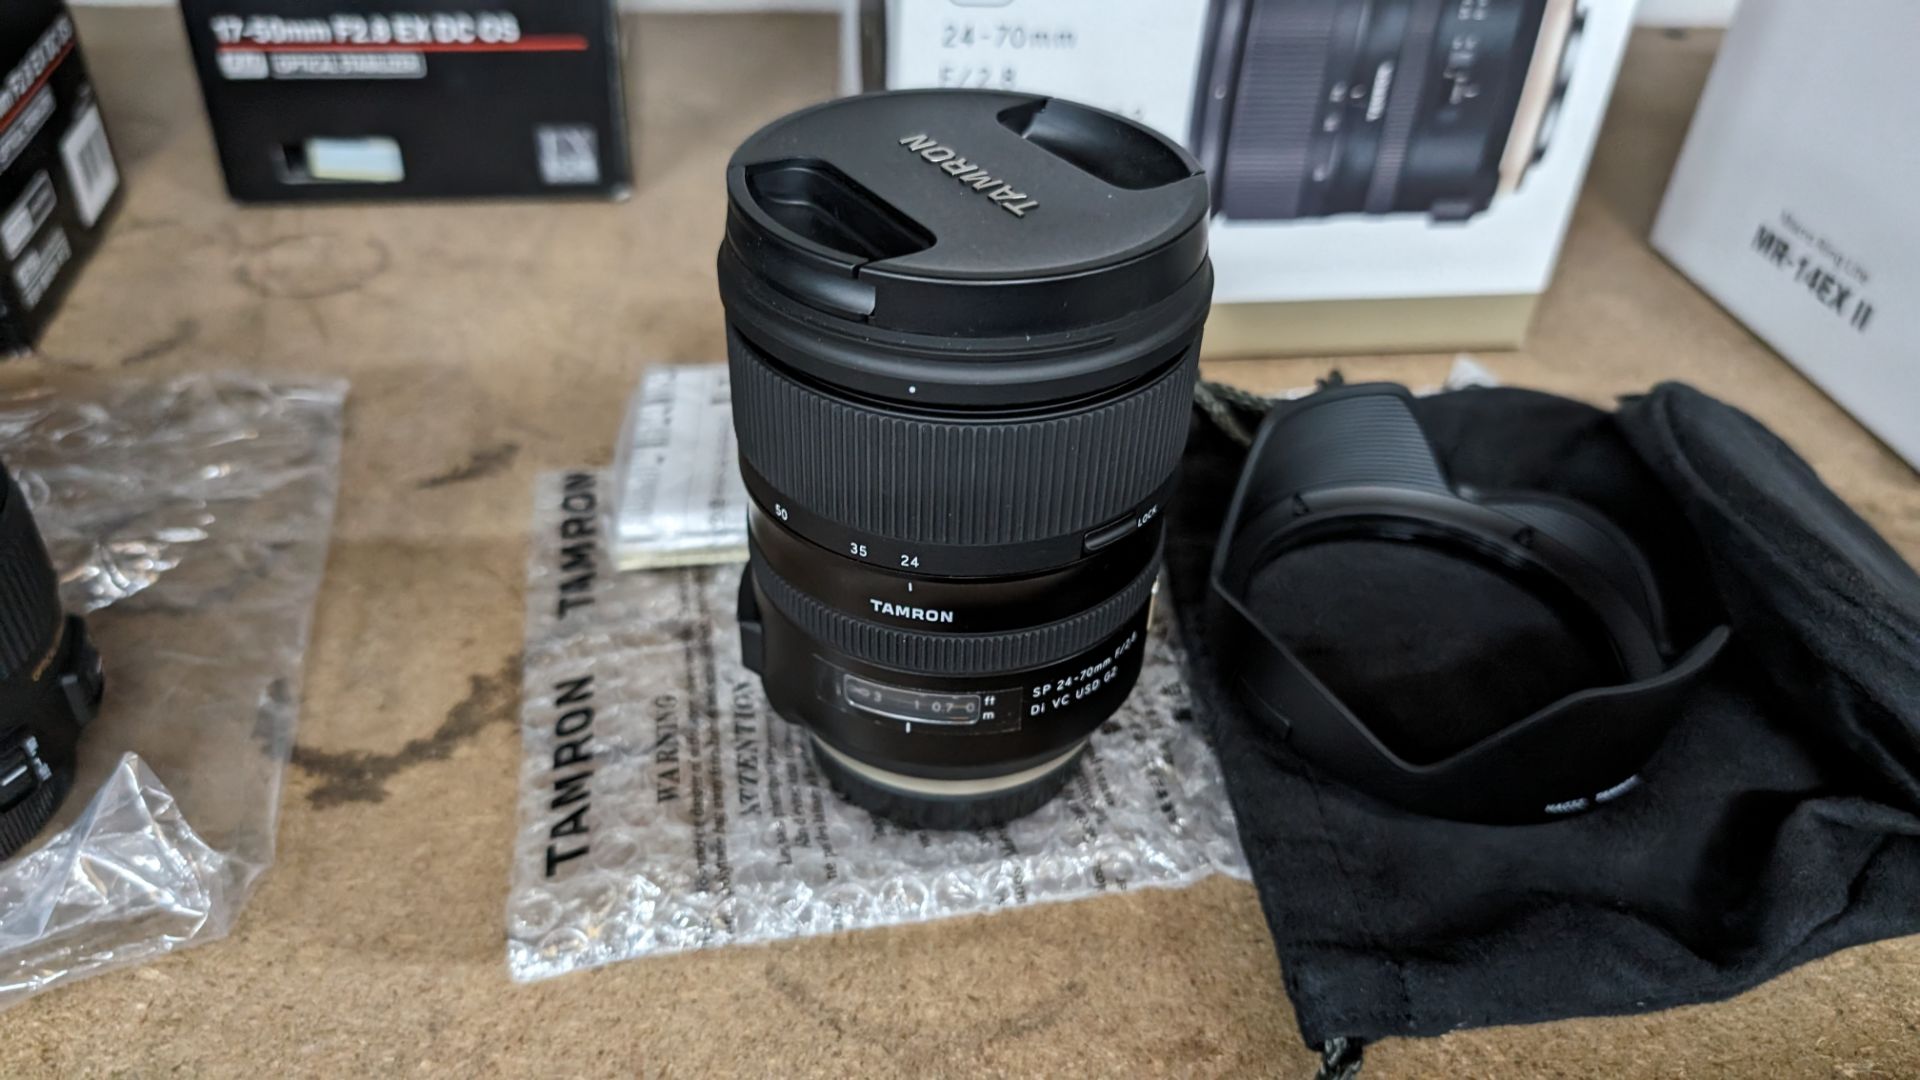 Tamron SP 24-70mm f/2.8 Di VC USD G2 lens, including soft carry case and attachment - Image 3 of 10